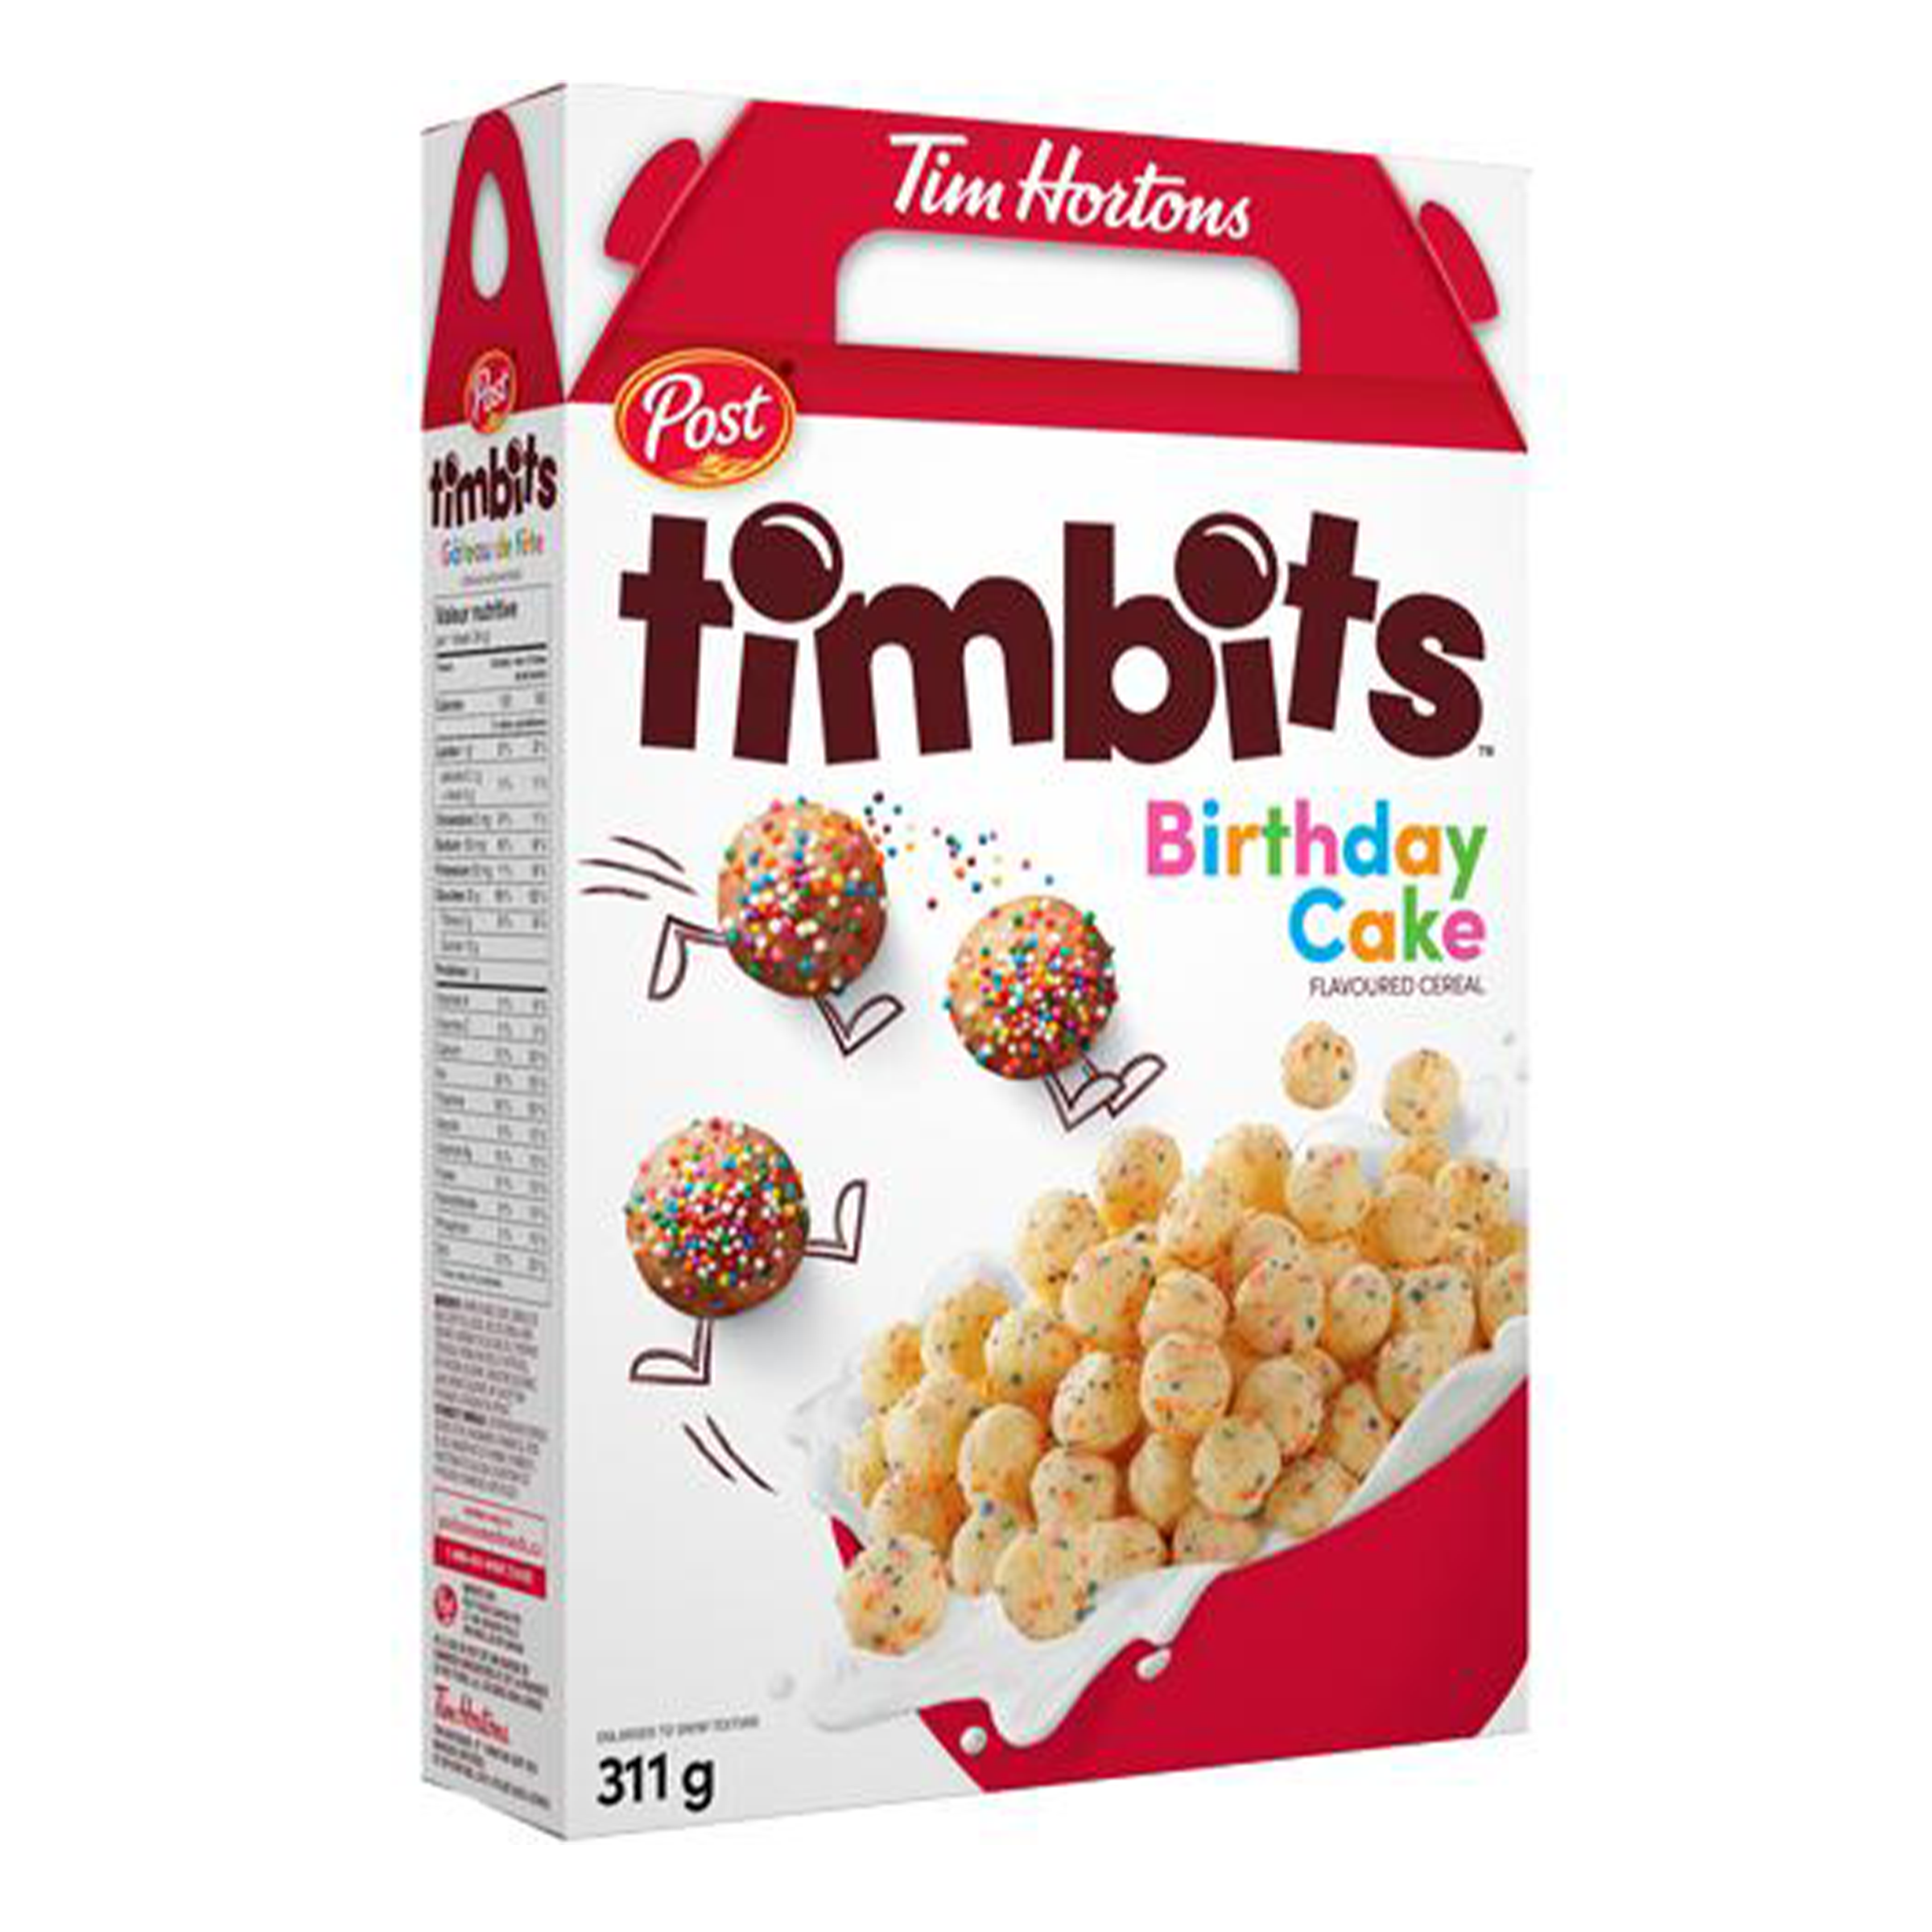 Tim Hortans - Birthday Cake Timbits Cereal